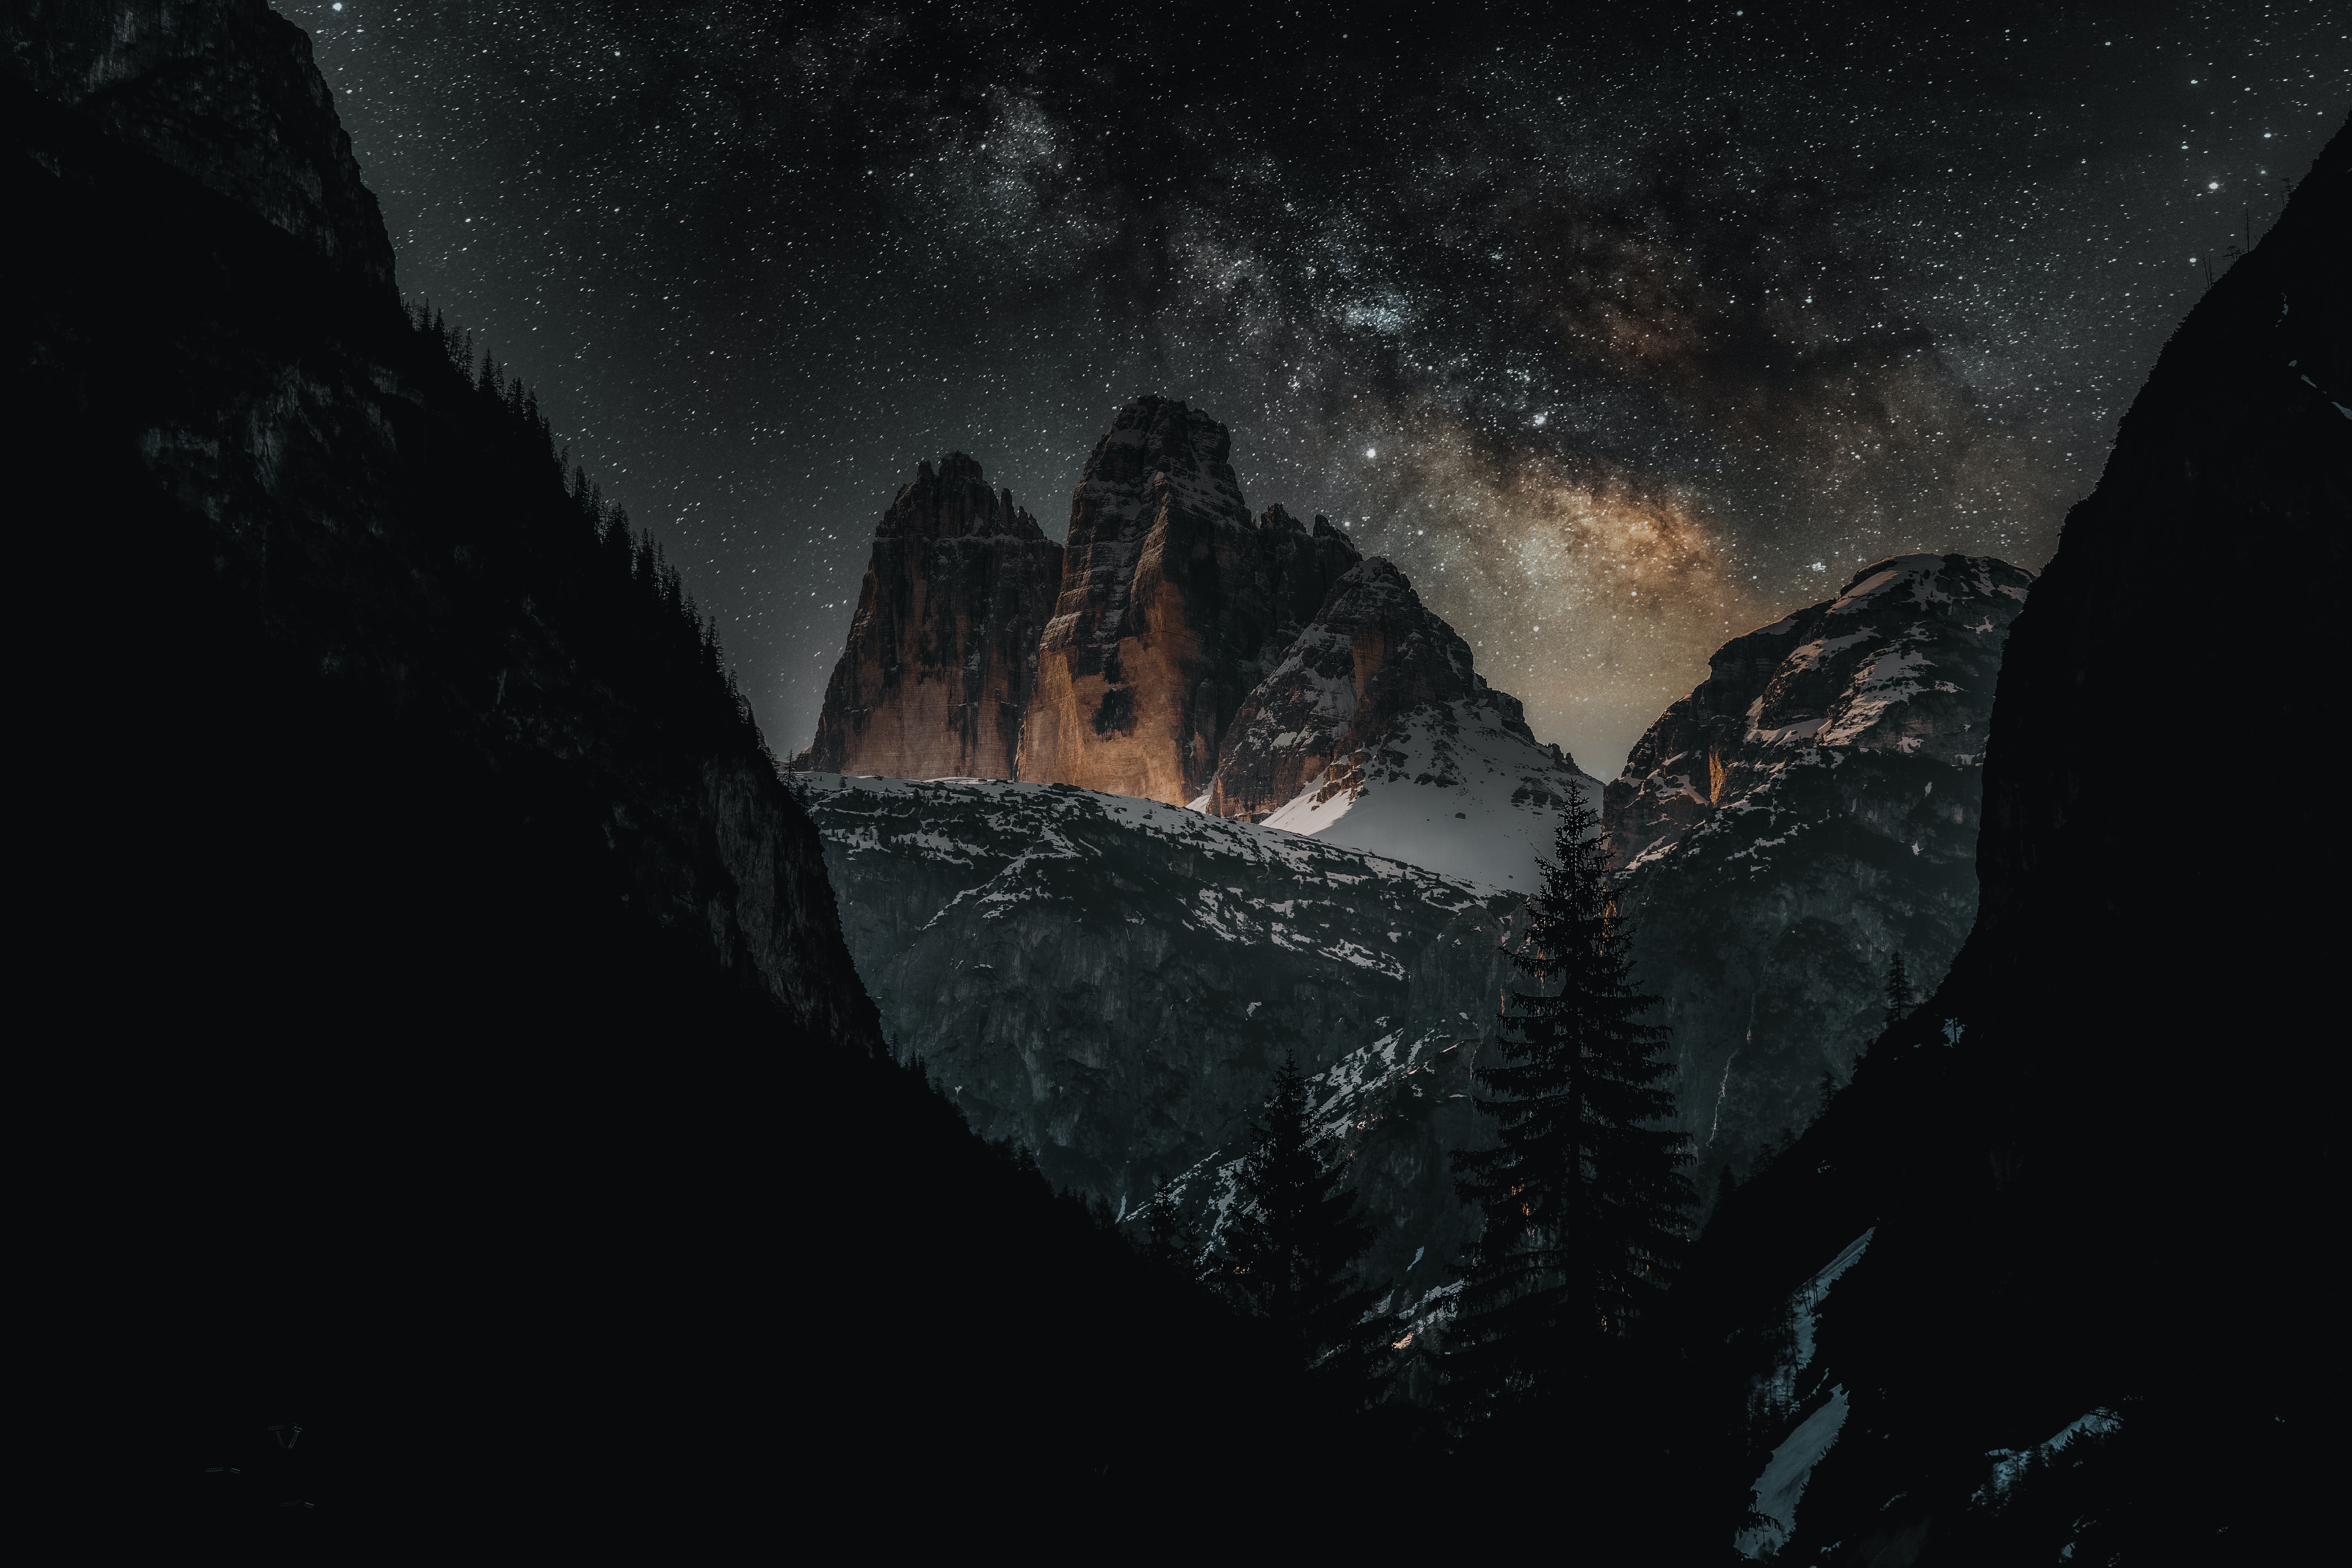 HD wallpaper, Dolomites, Starry Sky, Tourist Attraction, Three Peaks Of Lavaredo, Snow Covered, Italy, Mountain Peaks, Milky Way, Night Time, Outer Space, 5K